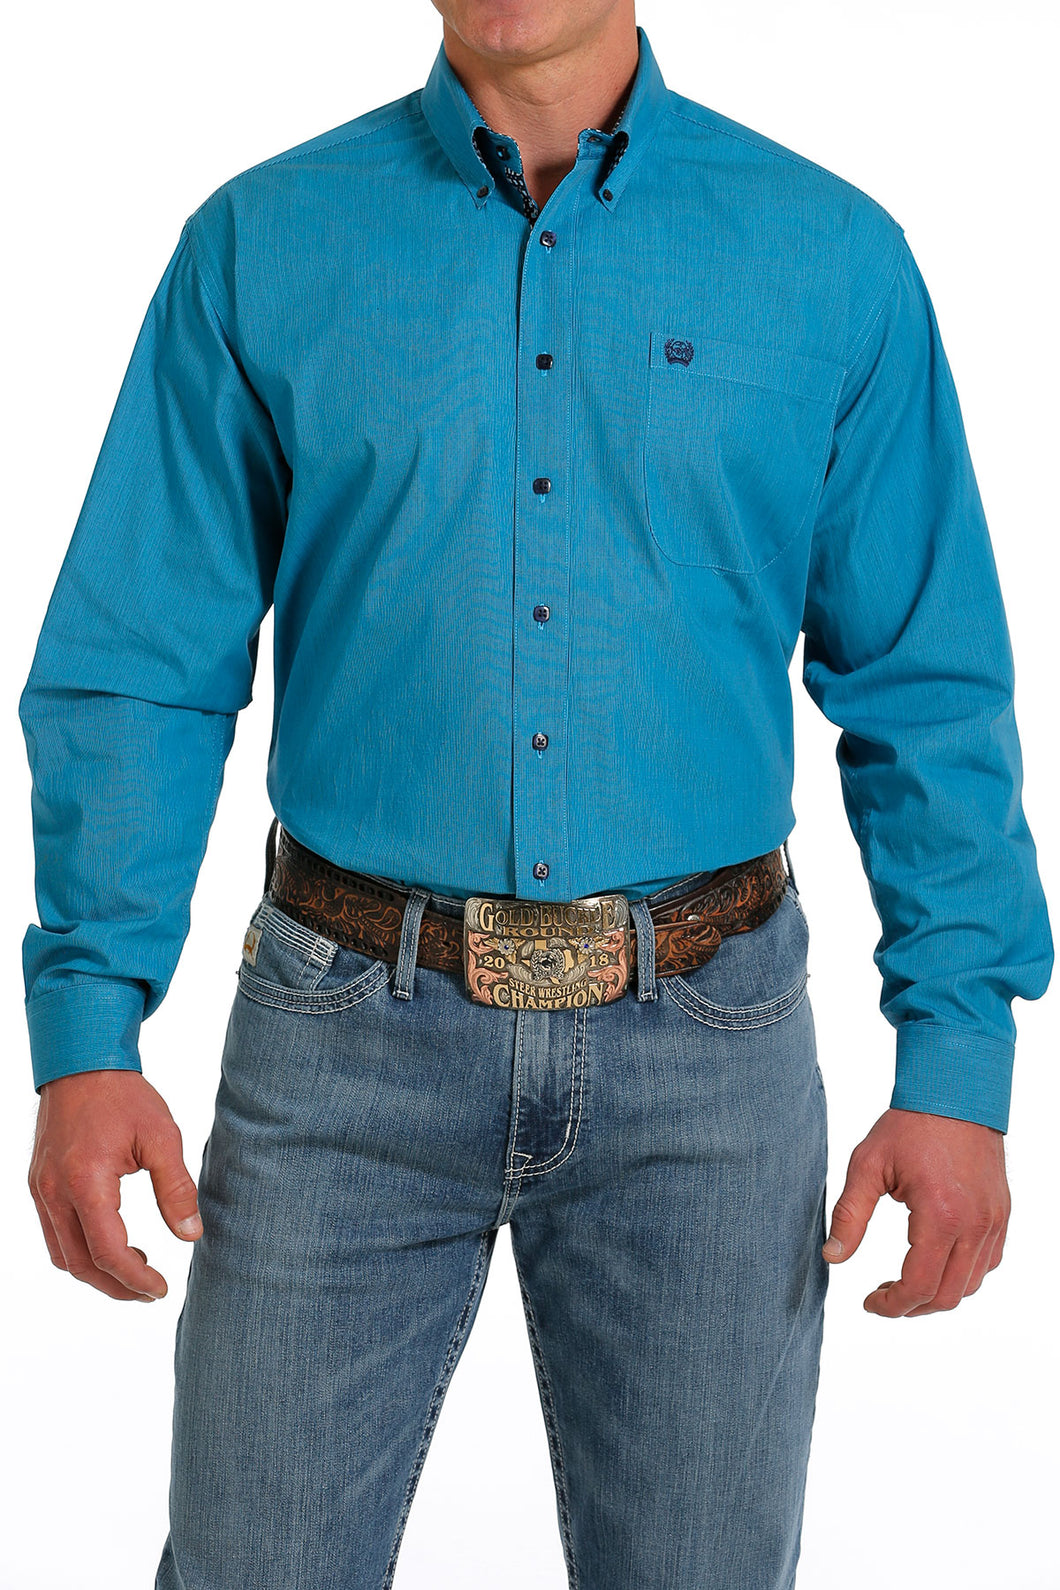 Pard's Western Shop Cinch Men's Turquoise with Navy Micro-stripe Button-Down Shirt